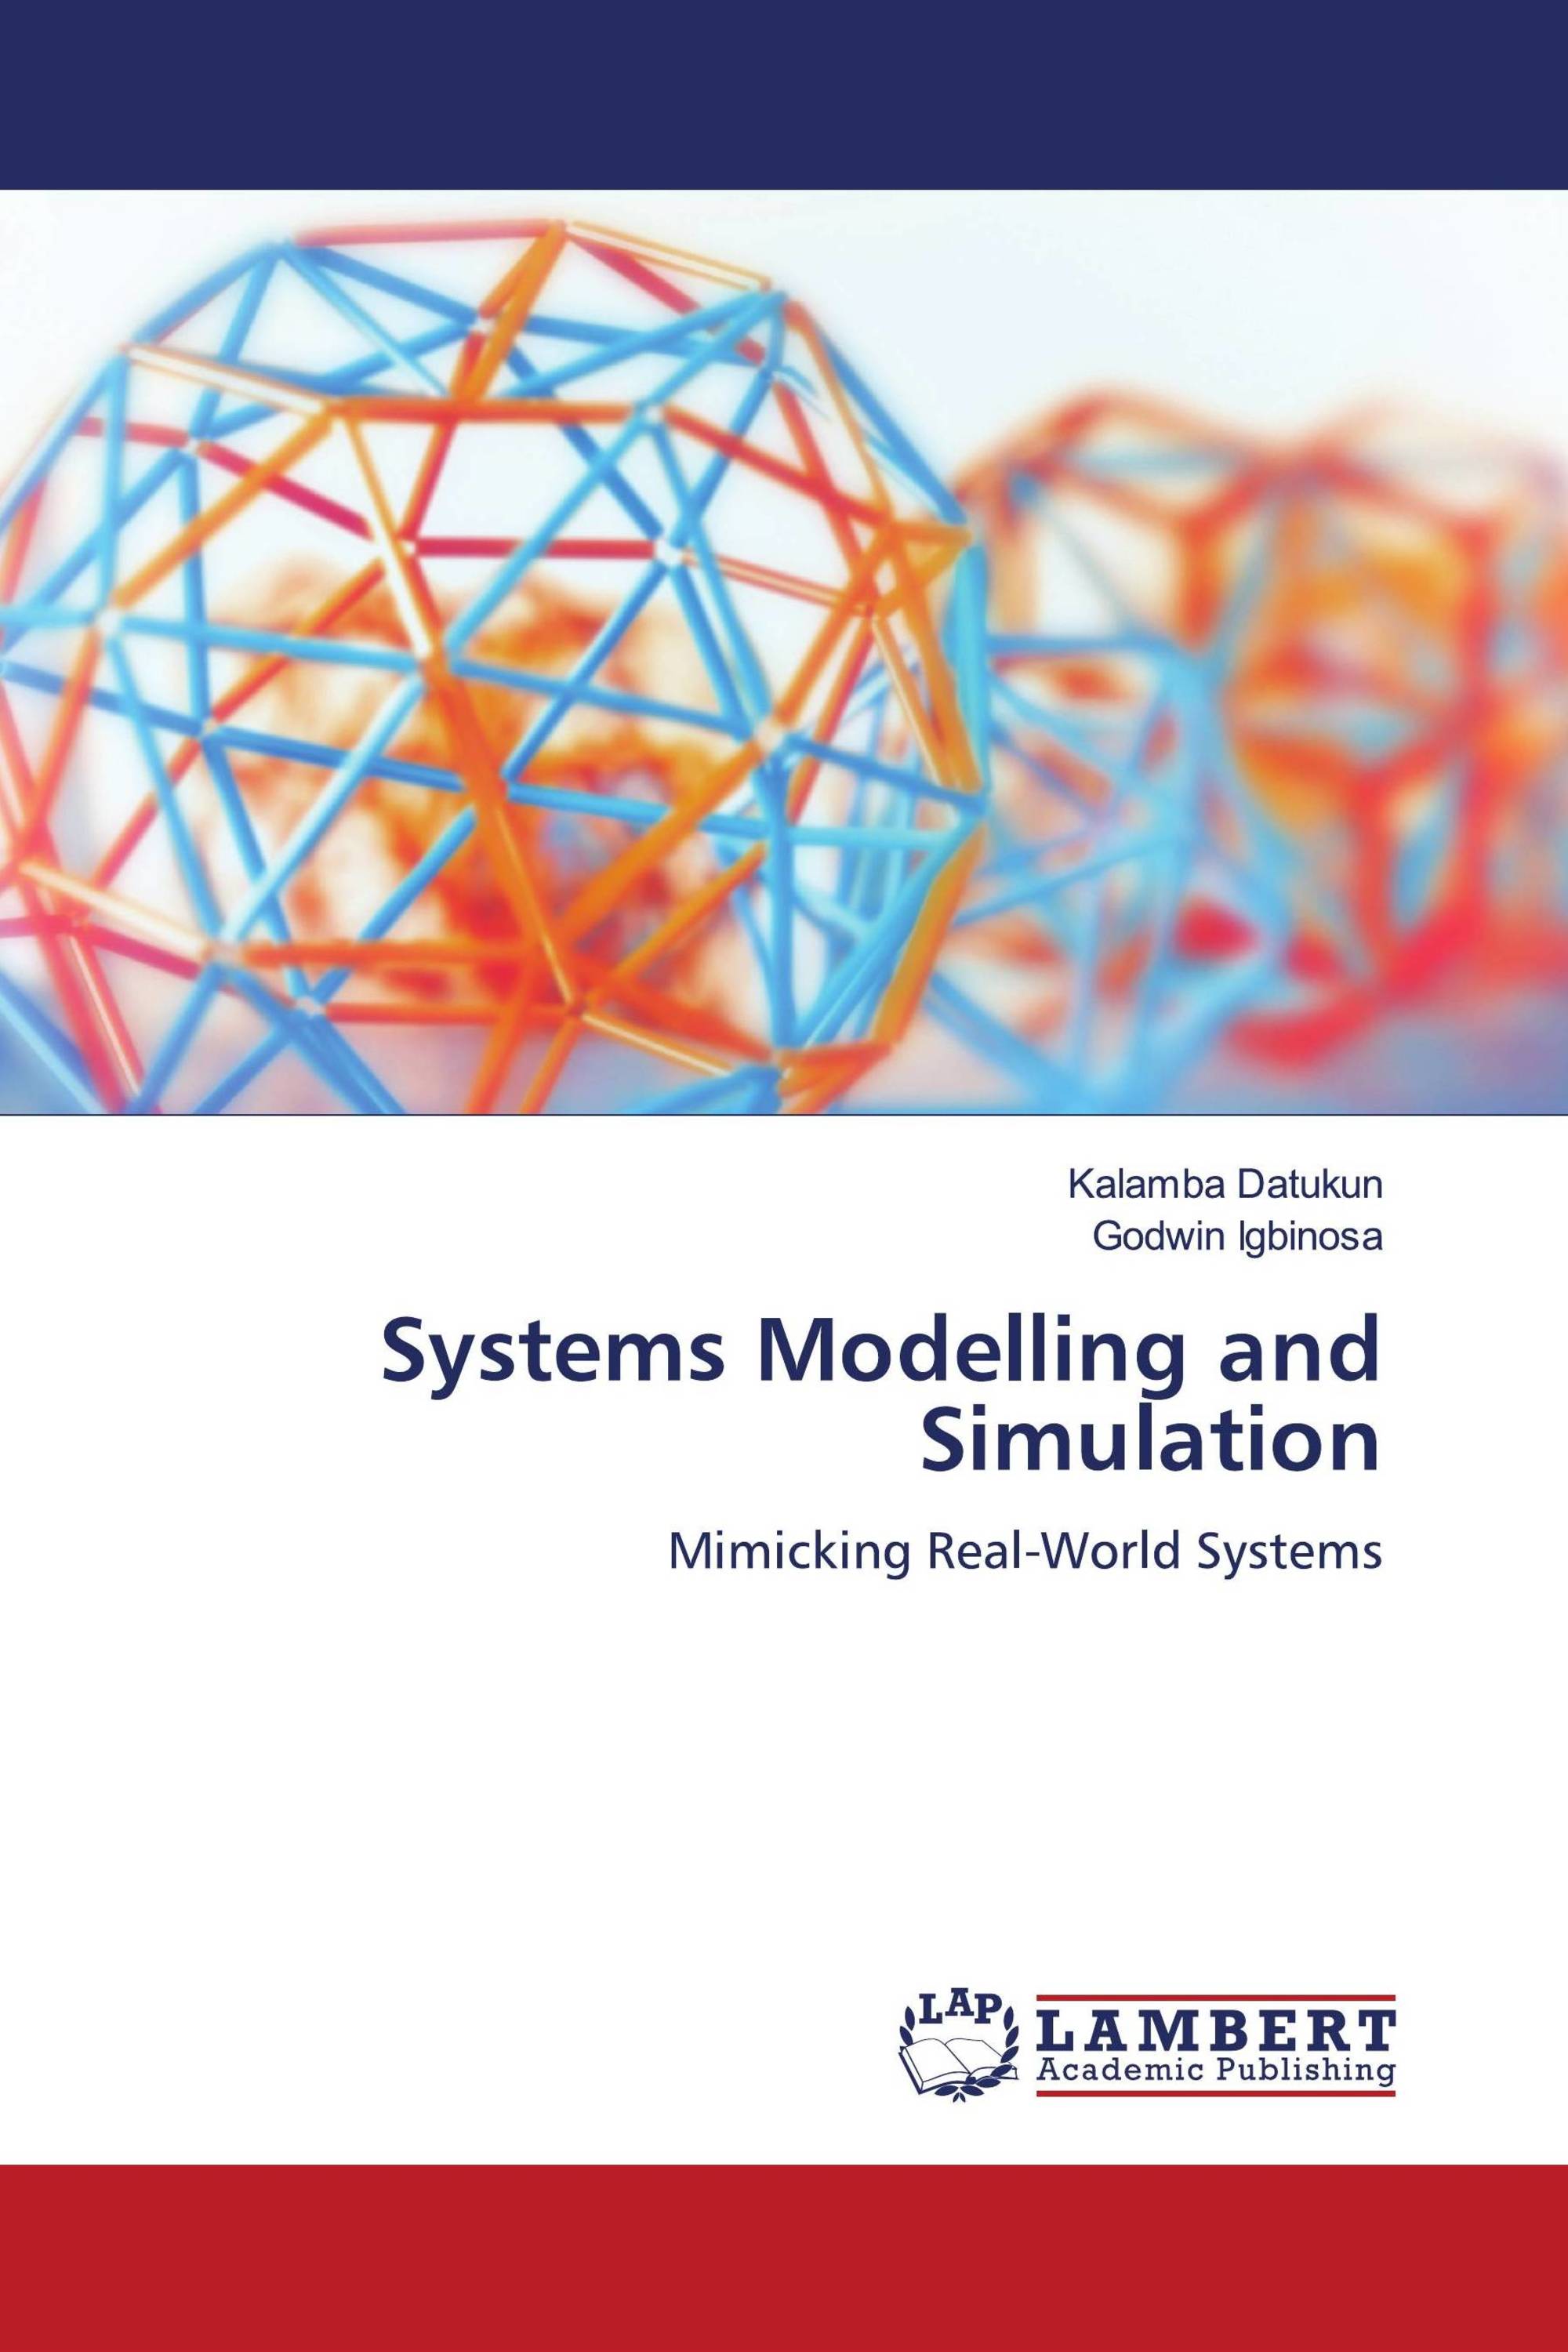 Systems Modelling and Simulation